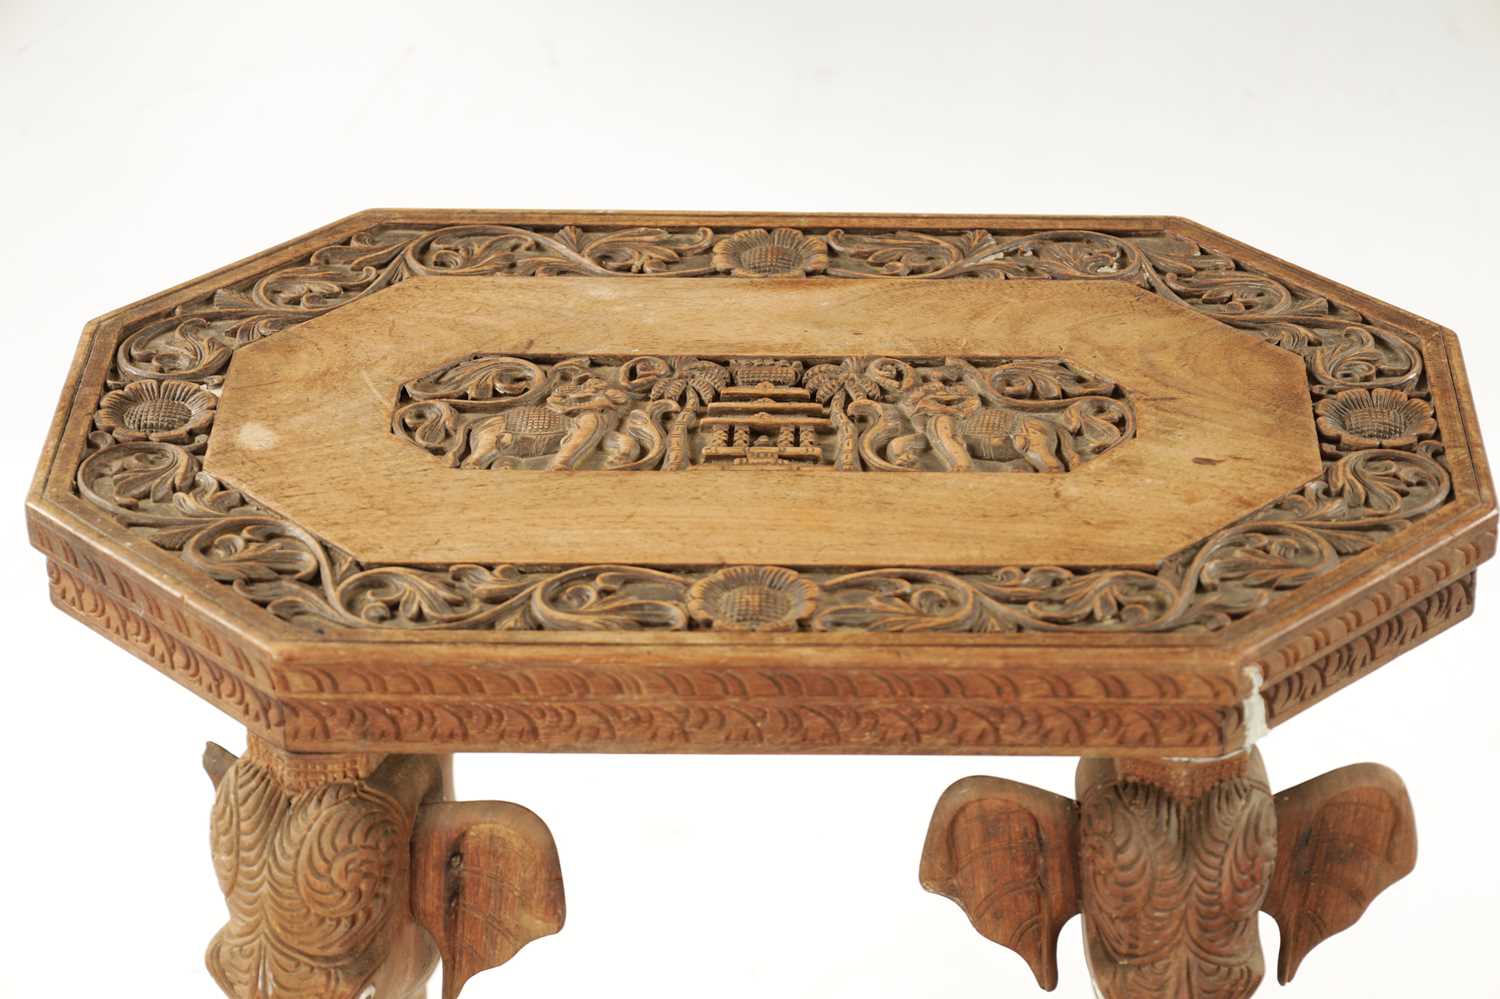 A 19TH CENTURY CARVED HARDWOOD INDIAN OCCASIONAL TABLE - Image 4 of 8